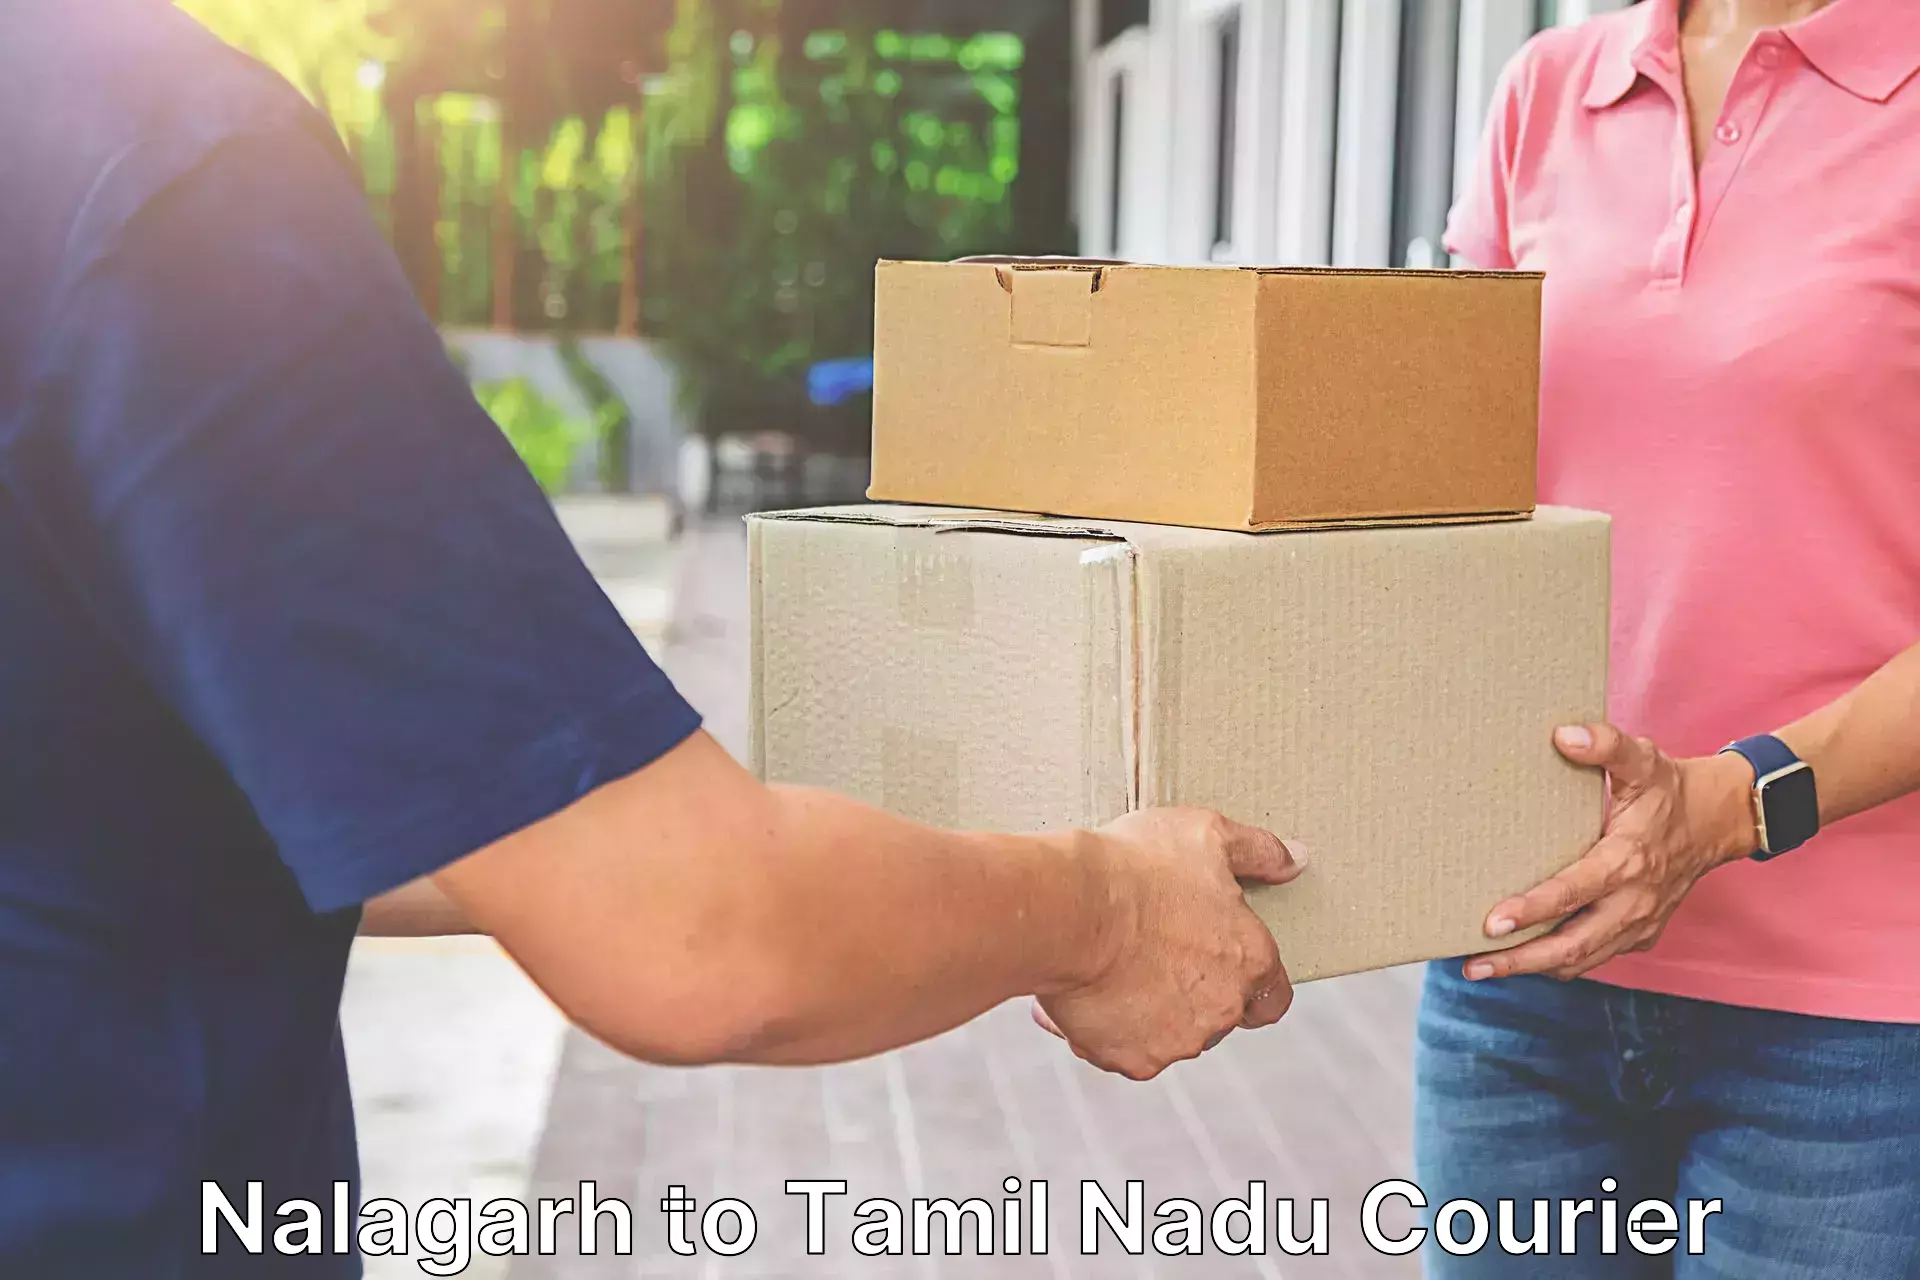 24-hour delivery options Nalagarh to Ambattur